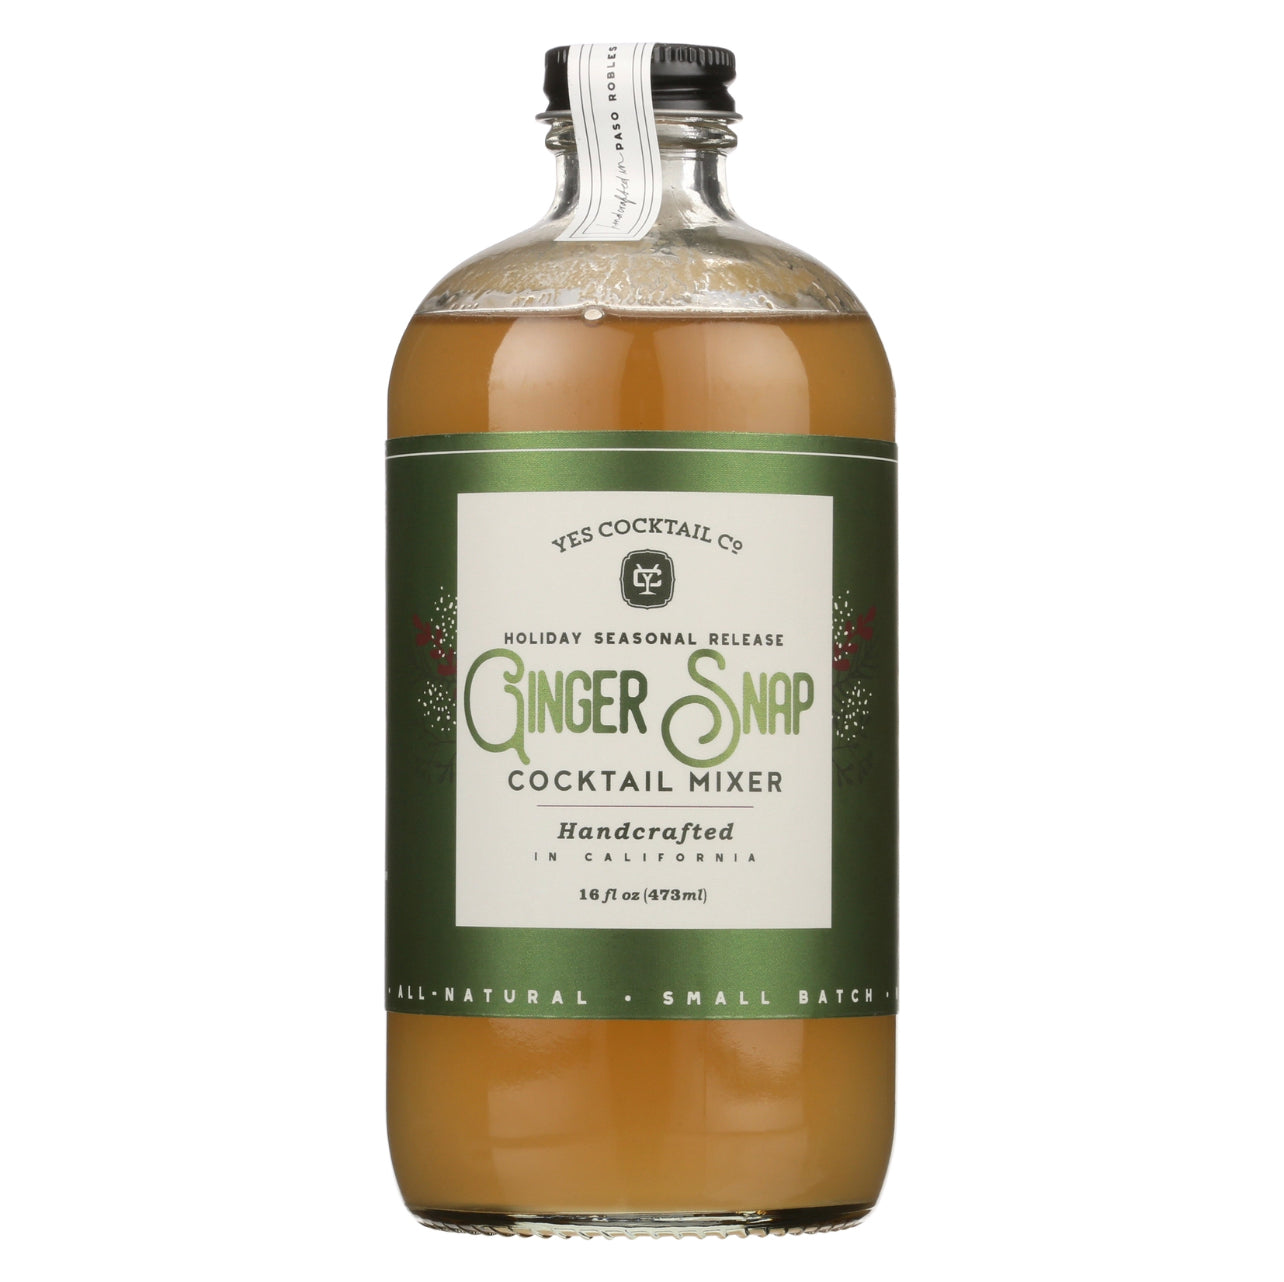 16 oz bottle of handcrafted Ginger Snap Cocktail Mixer made by Yes Cocktail Co